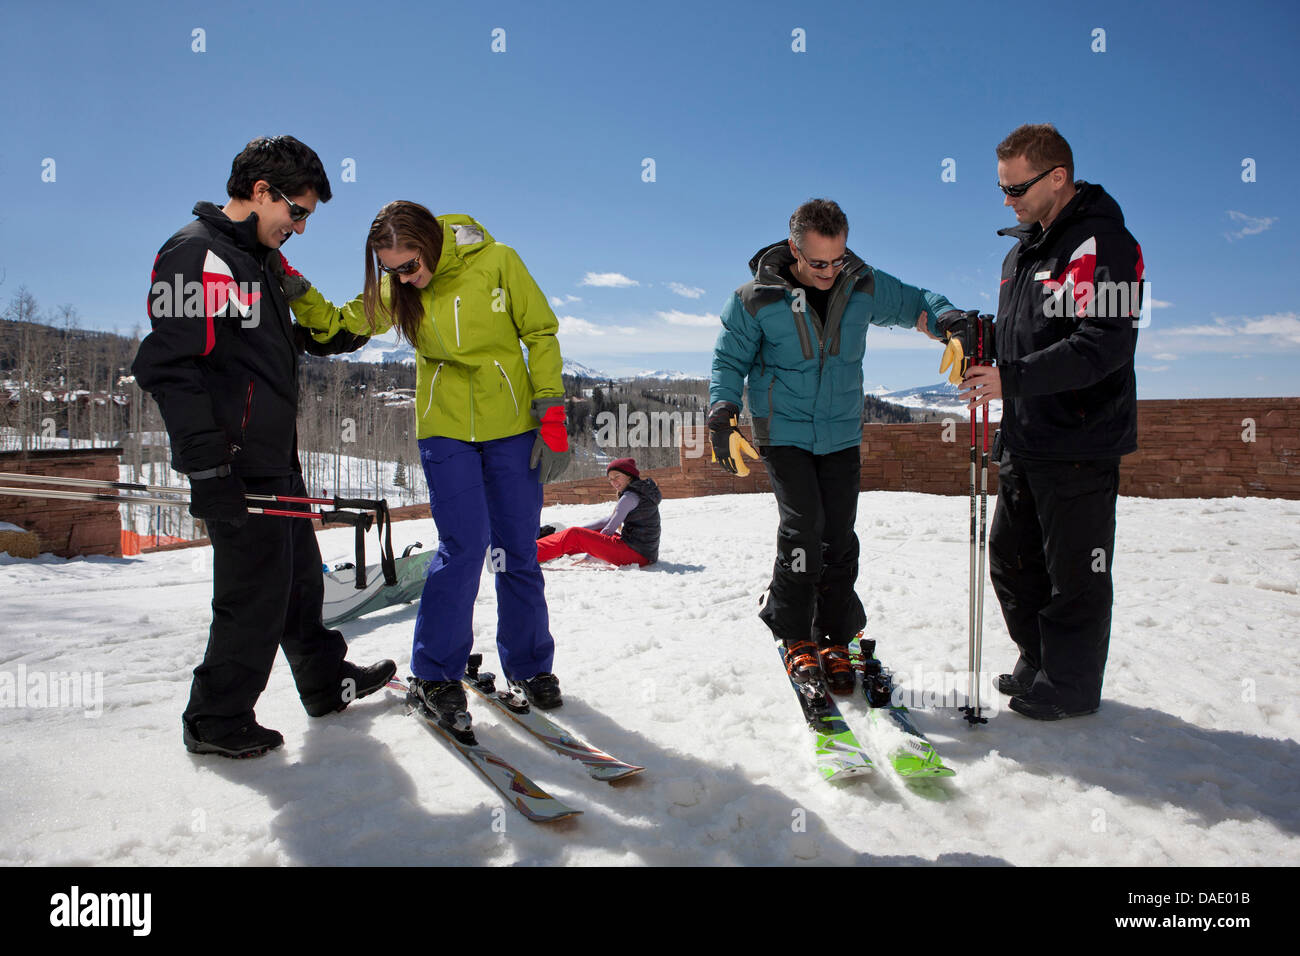 Mature man and young woman with ski instructors on ski slope Stock Photo